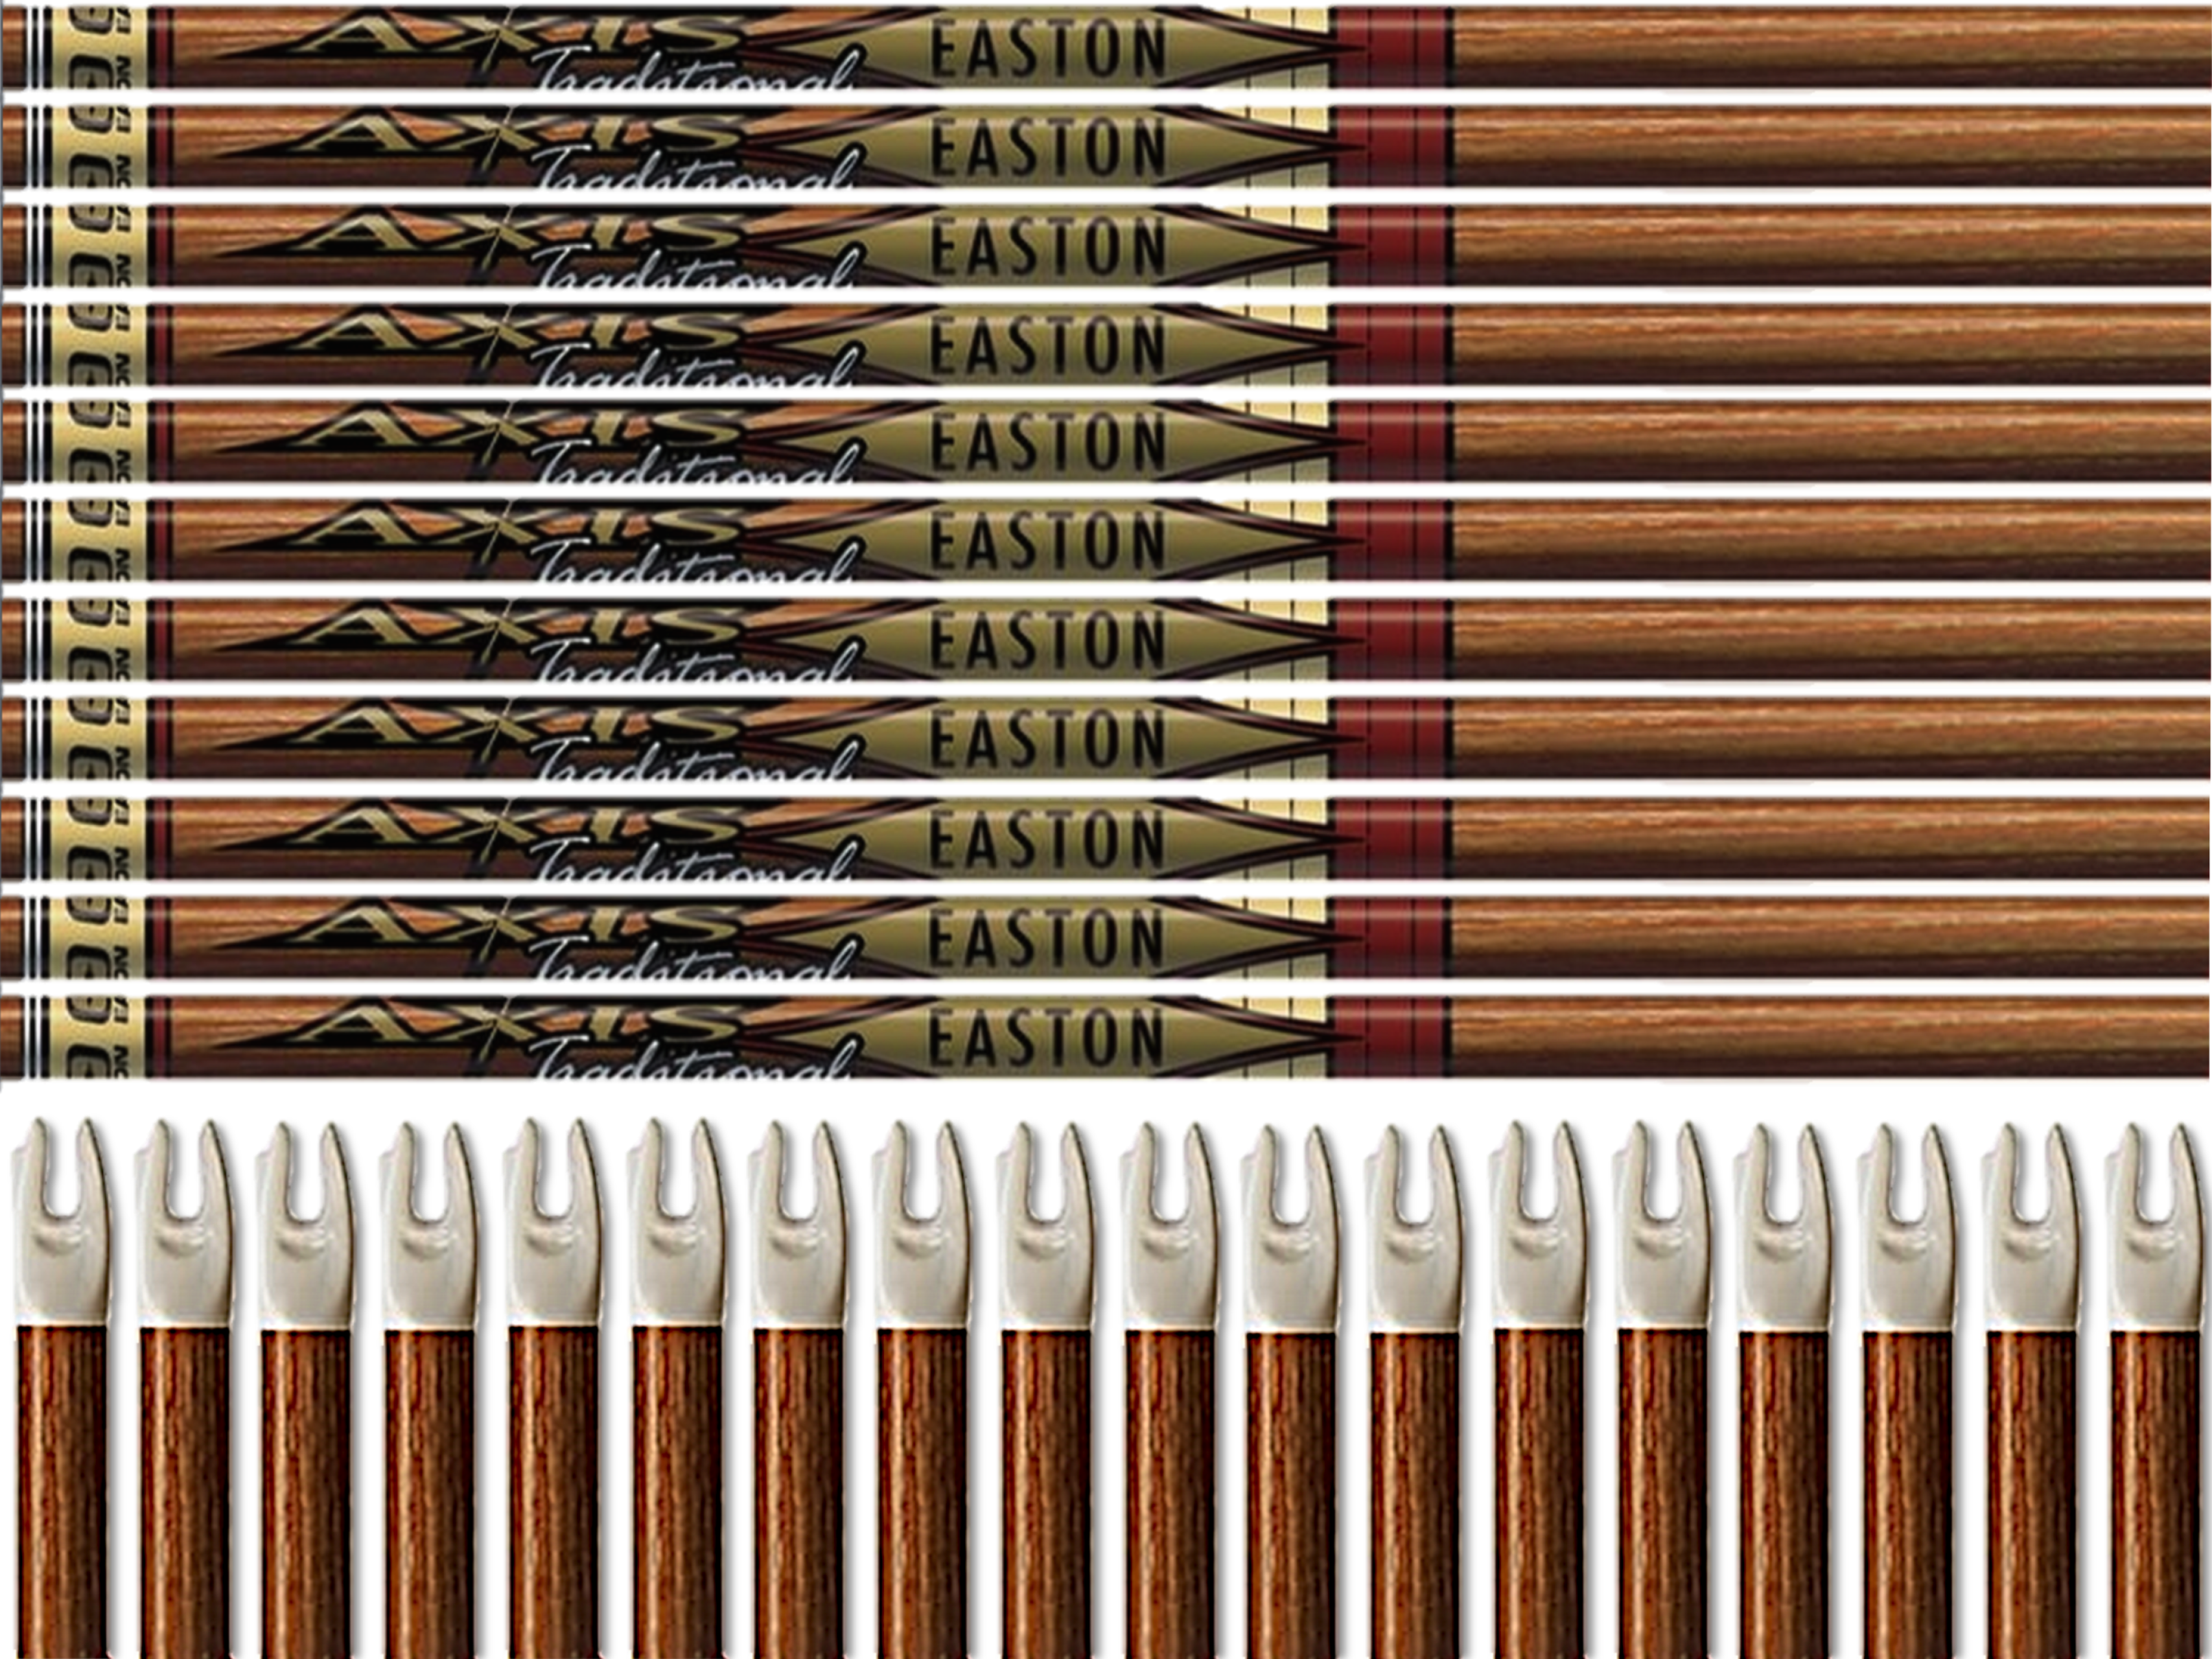 Easton Axis Traditional Arrows (Shafts Only) - set of 6